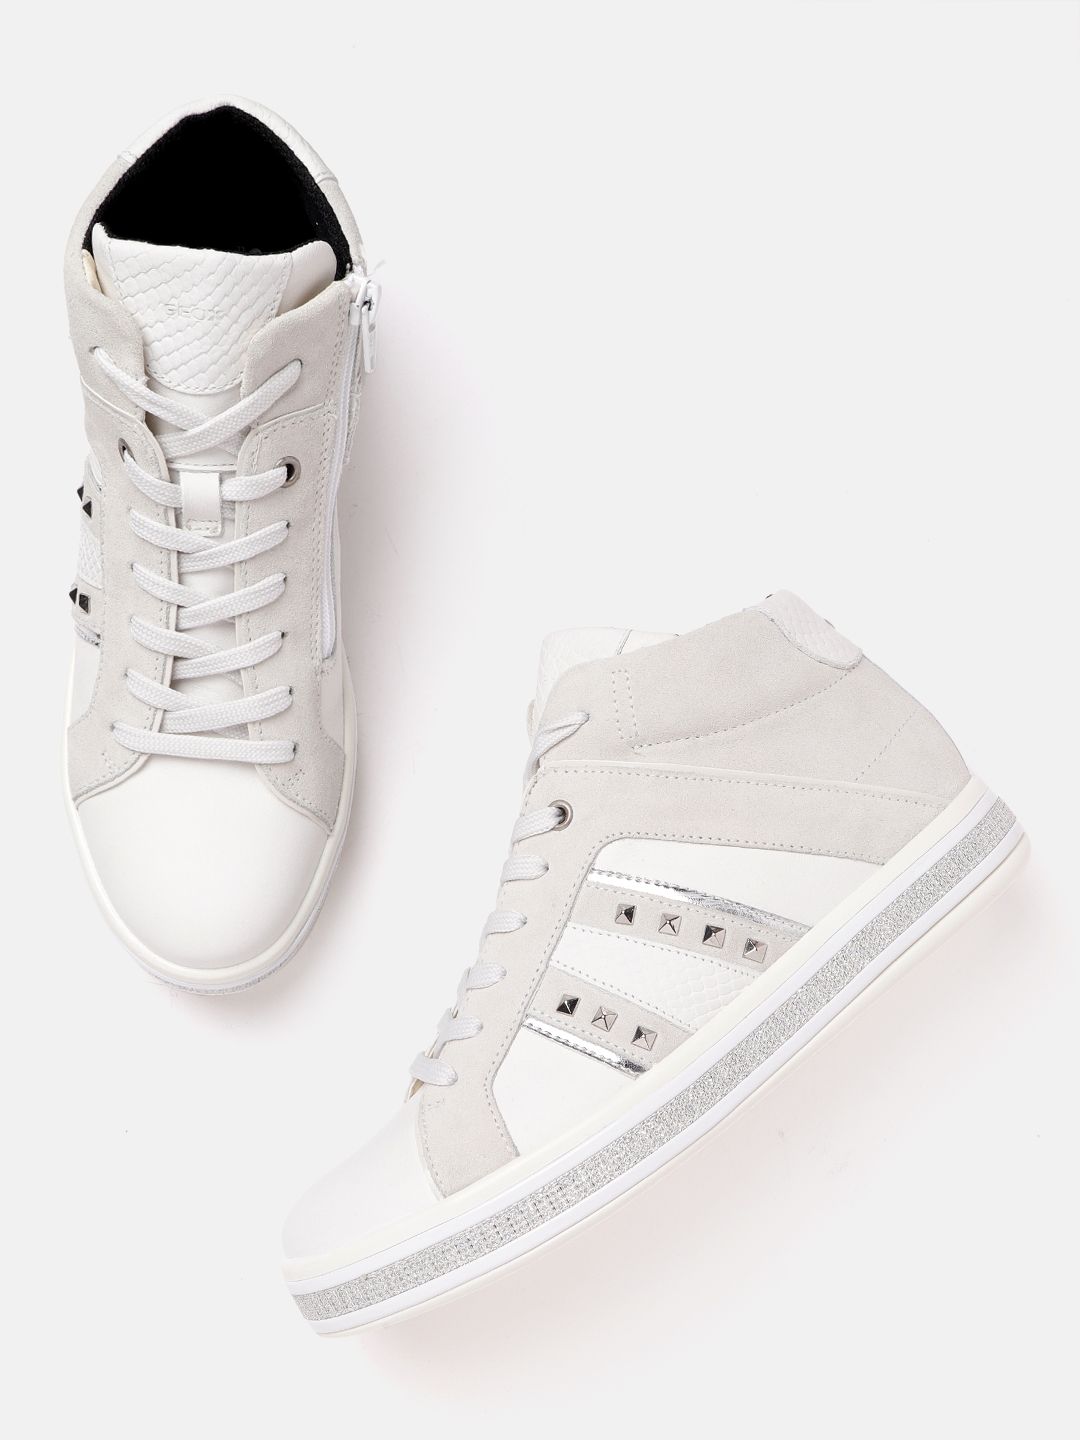 Geox Women White Leather Sneakers Price in India